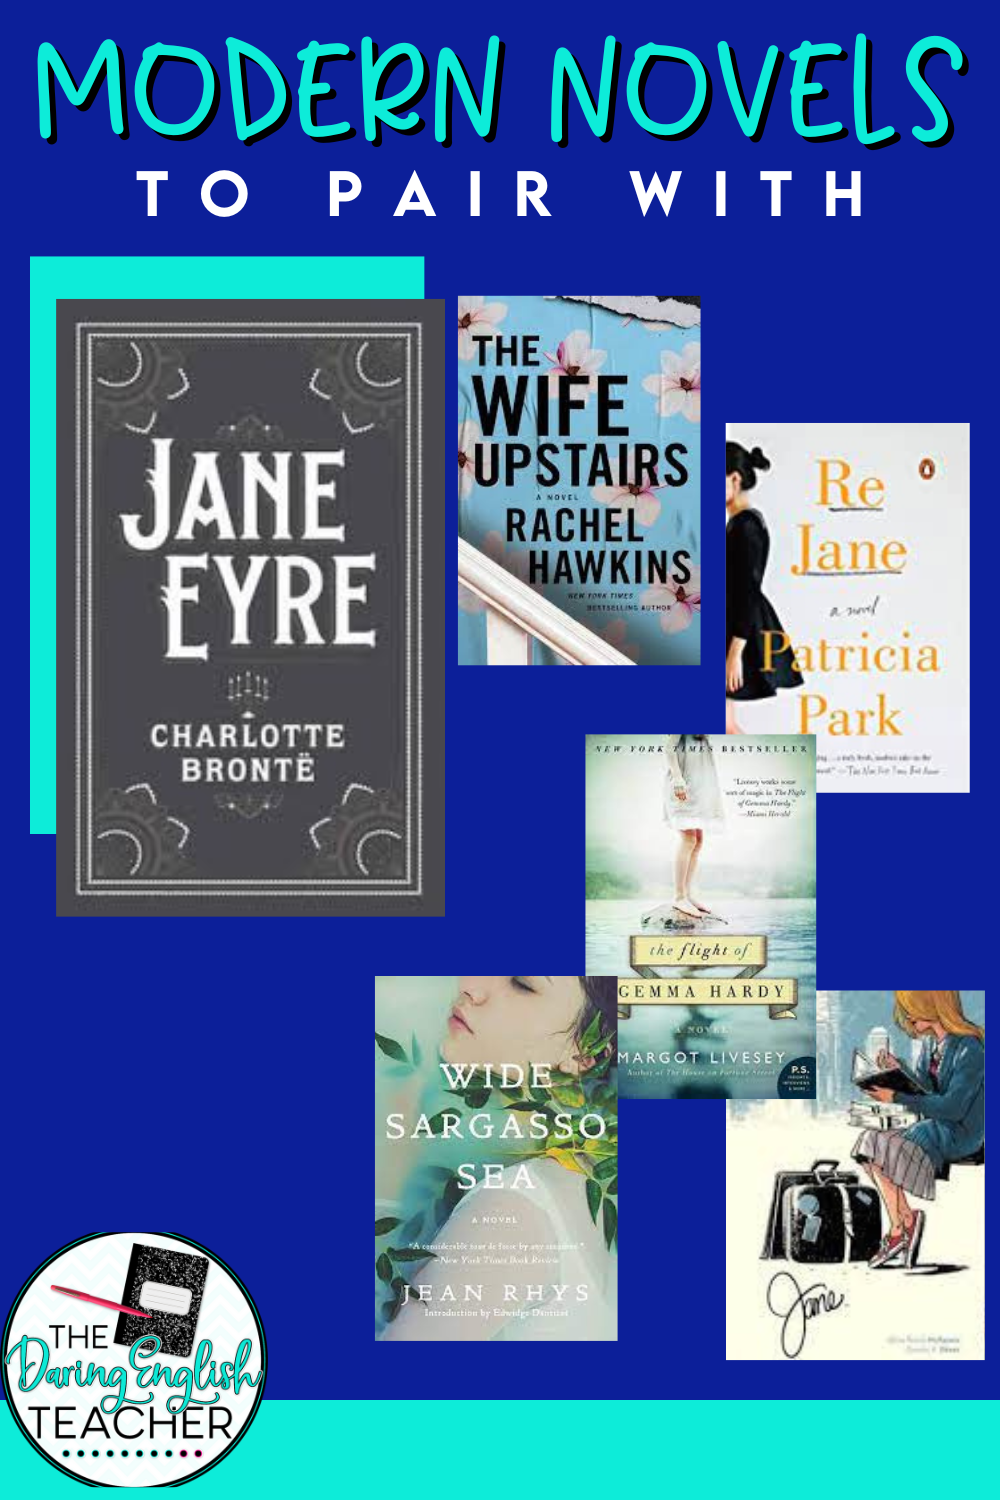 Modern novels to pair with Jane Eyre